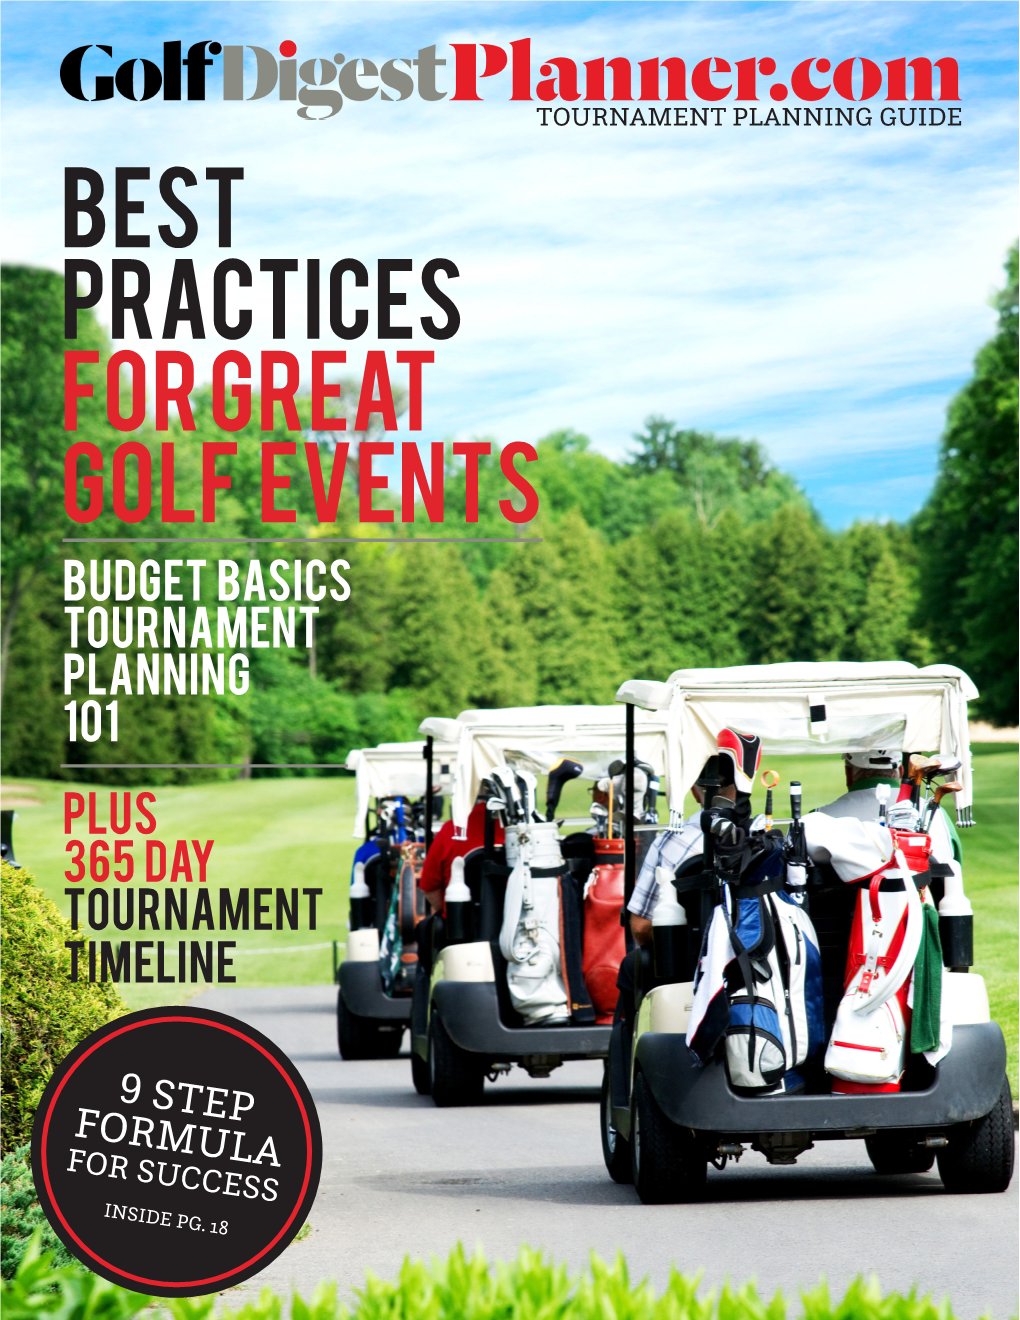 BEST PRACTICES for GREAT GOLF EVENTS BUDGET BASICS Tournament Planning 101 PLUS 365 Day Tournament Timeline